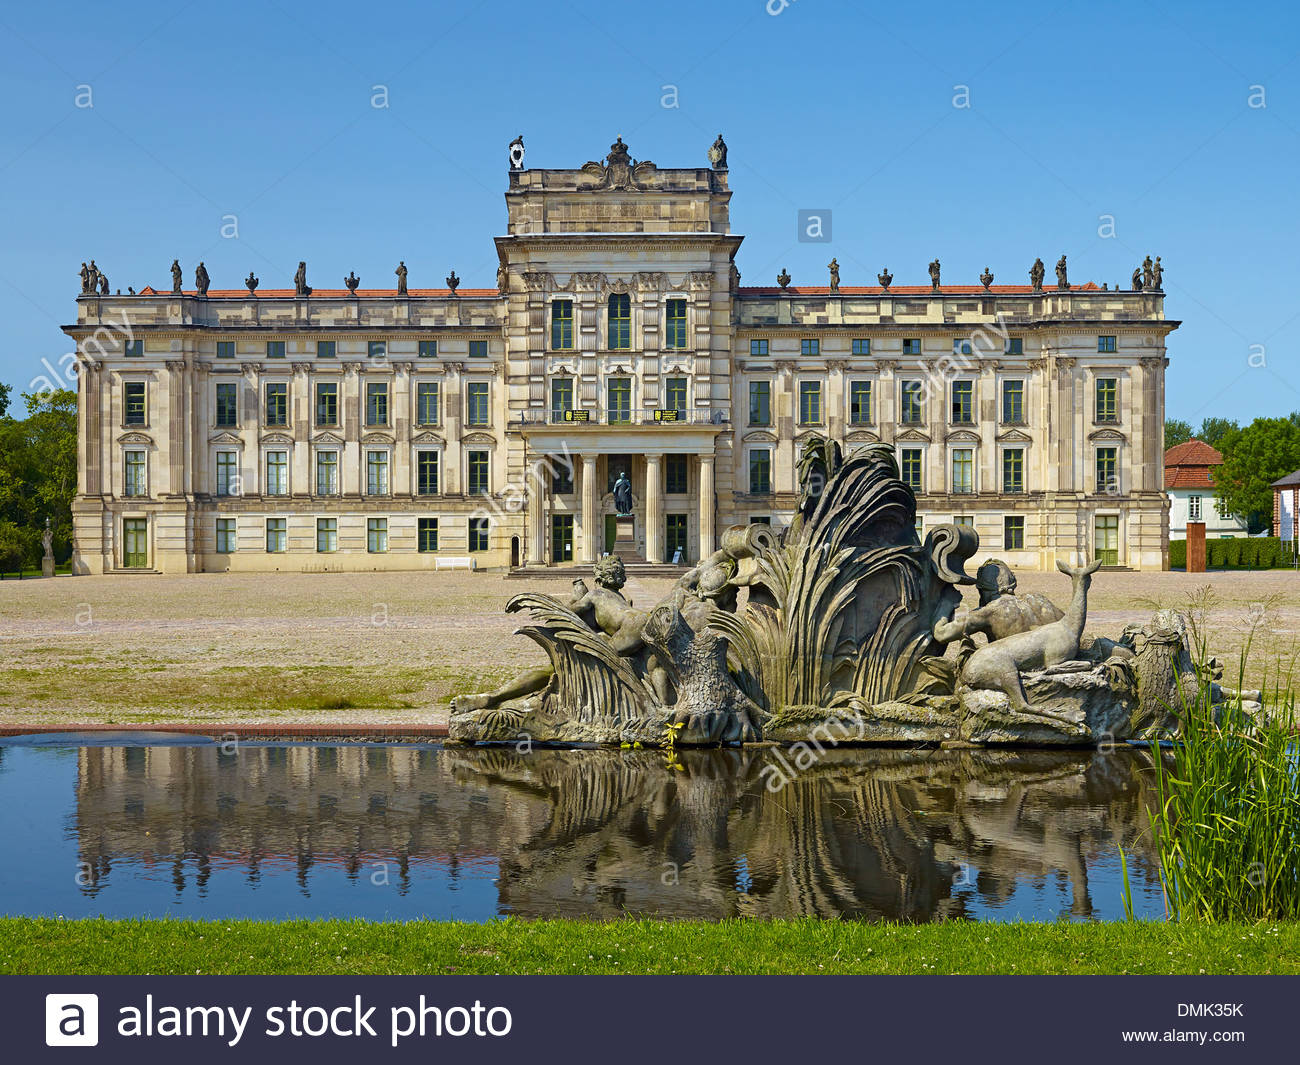 Nice Images Collection: Ludwigslust Palace Desktop Wallpapers